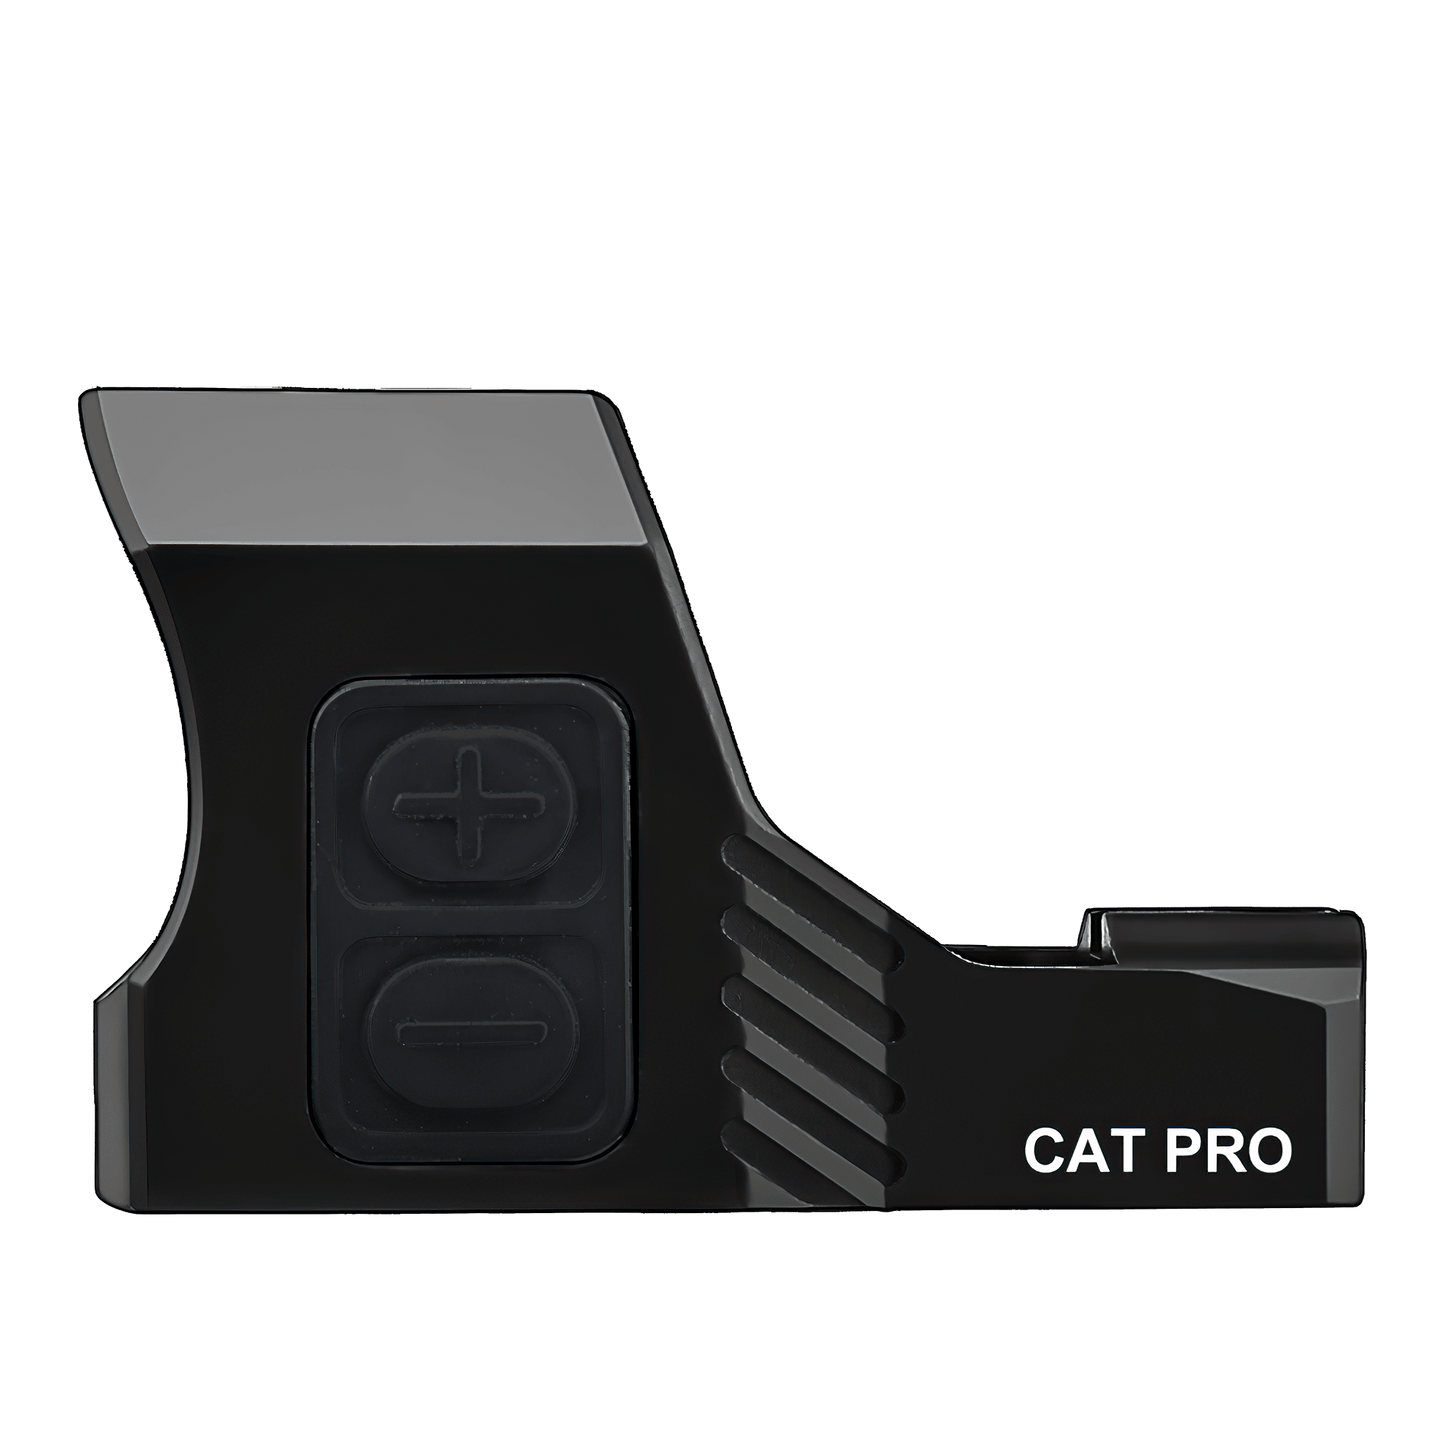 a cat pro camera with a black background